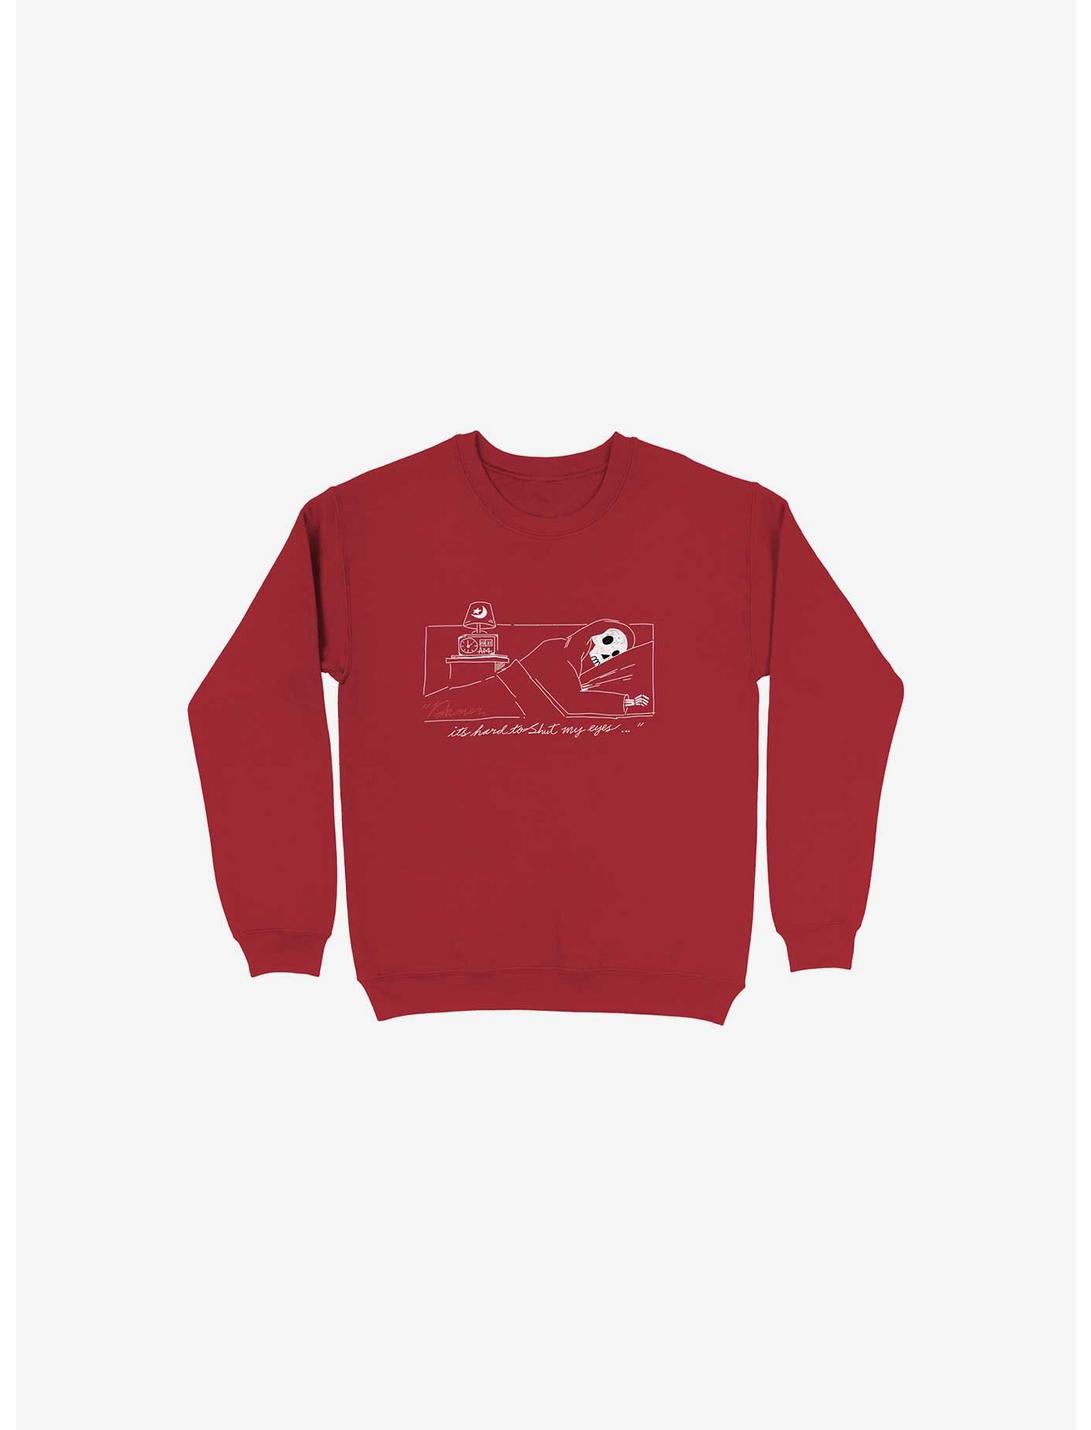 Damn, Sleepy Time Is Out Sweatshirt, RED, hi-res